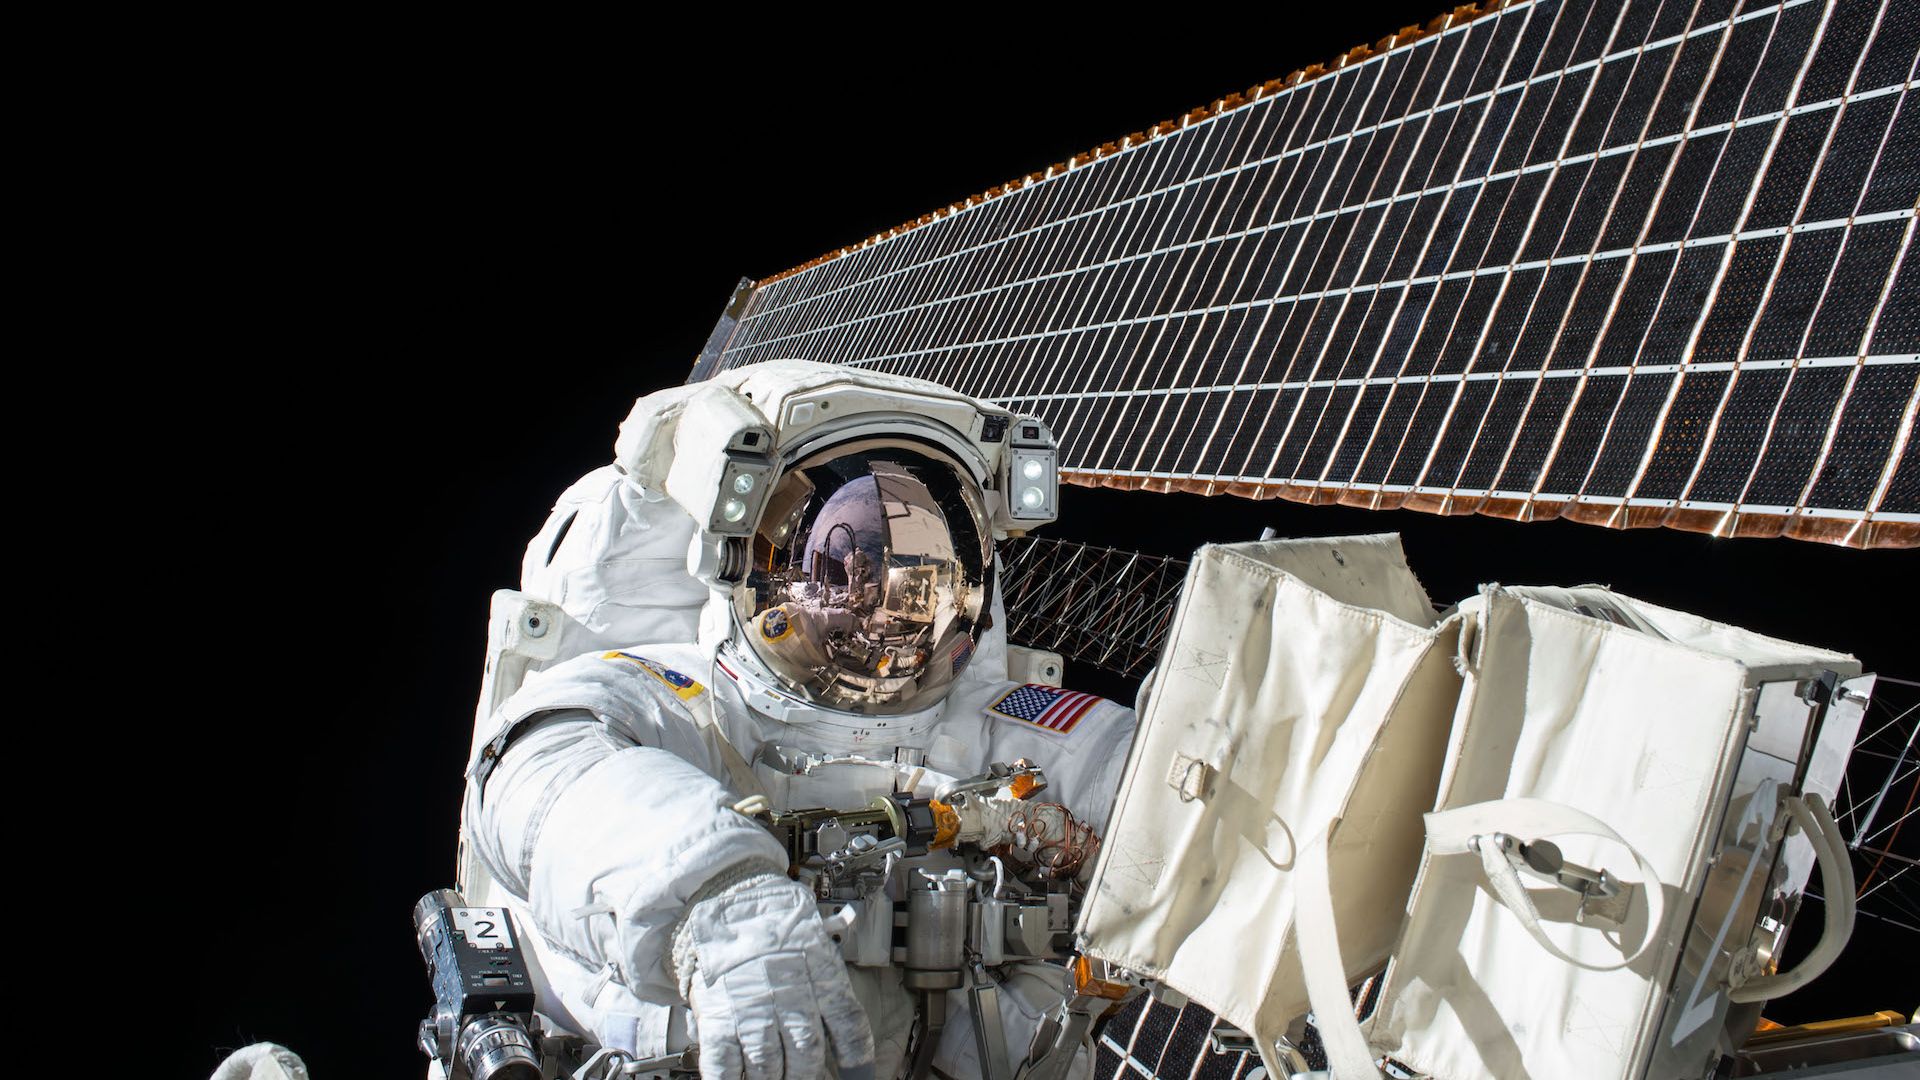 NASA plans history's first all-female spacewalk for March 29 - Axios1920 x 1080